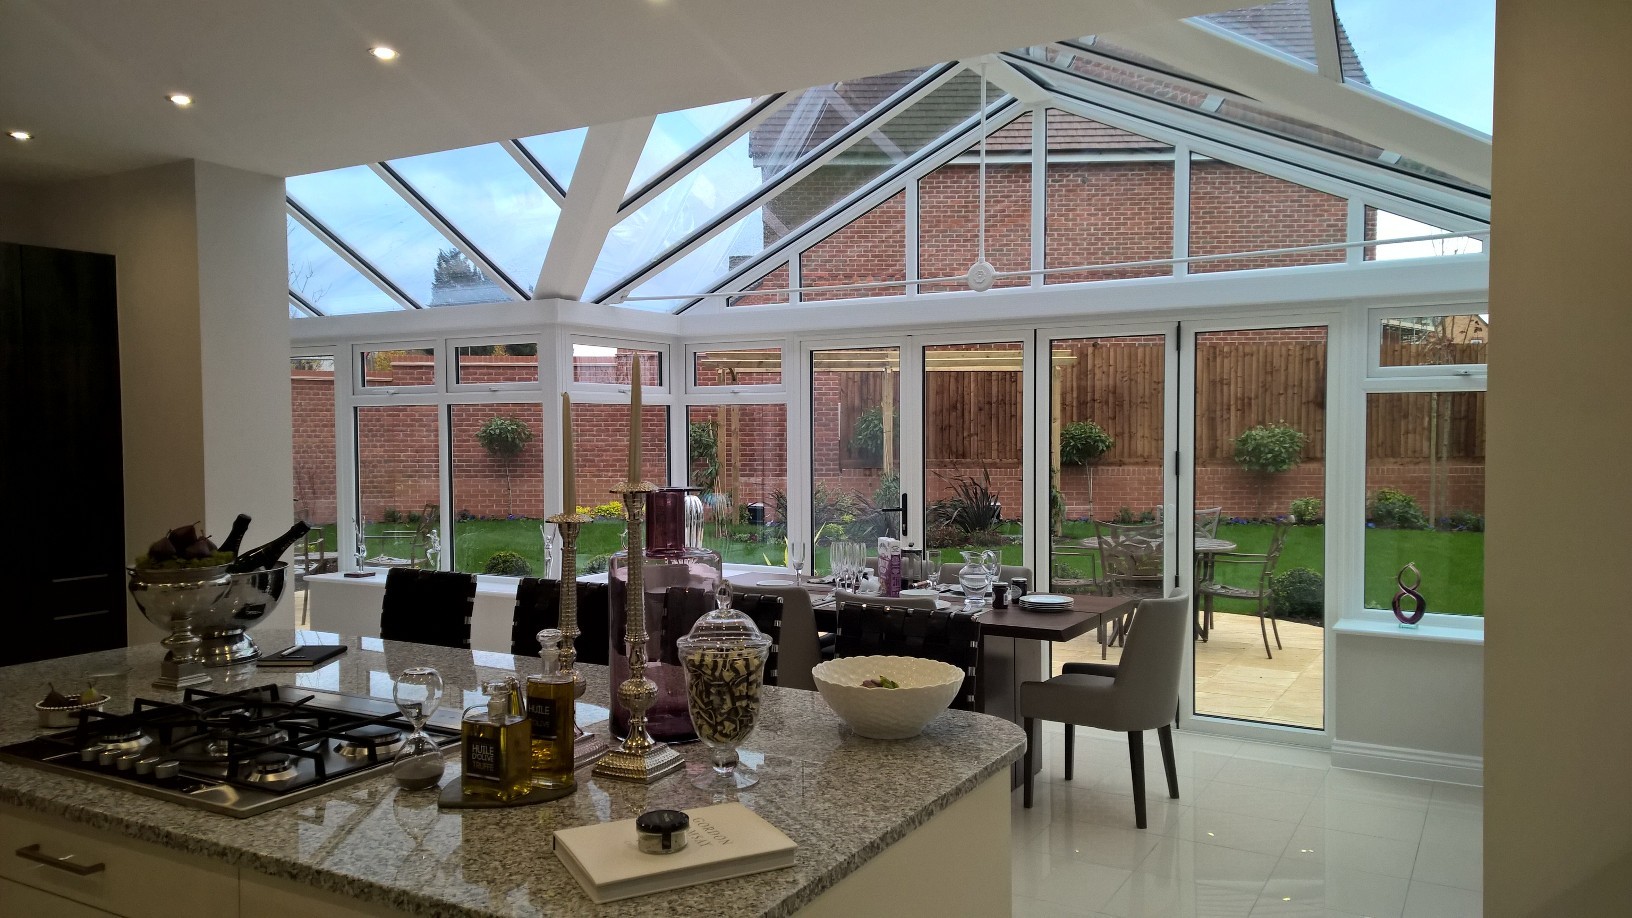 Customized Gable-End Conservatory design tailored to specific property dimensions, showcasing how bespoke manufacturing ensures a seamless complement to individual home styles and tastes​